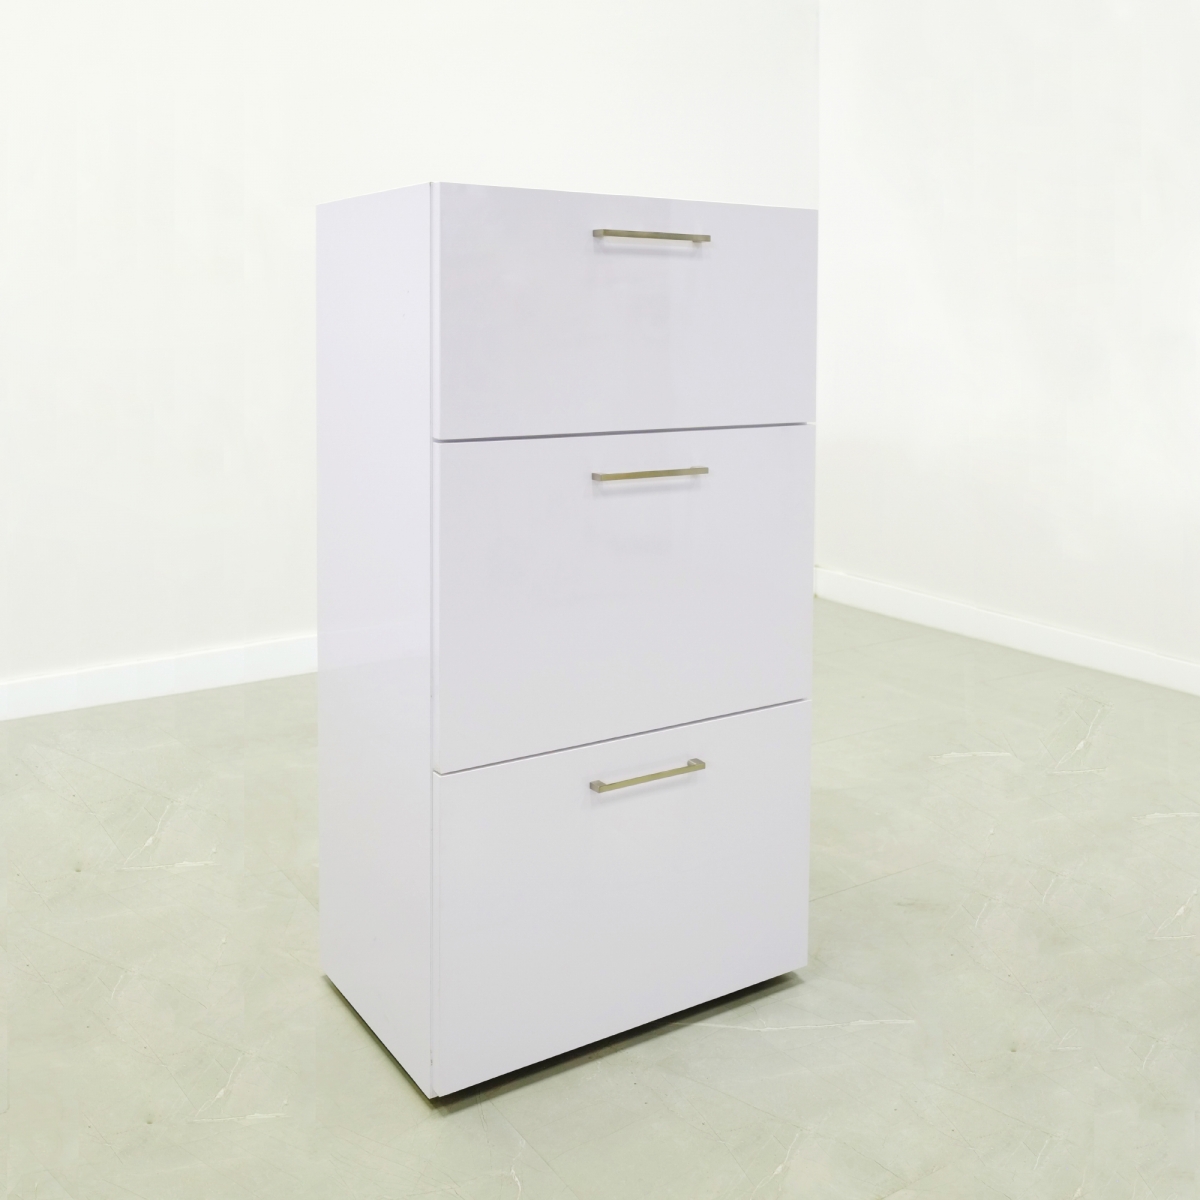 Axis Lateral File Cabinets